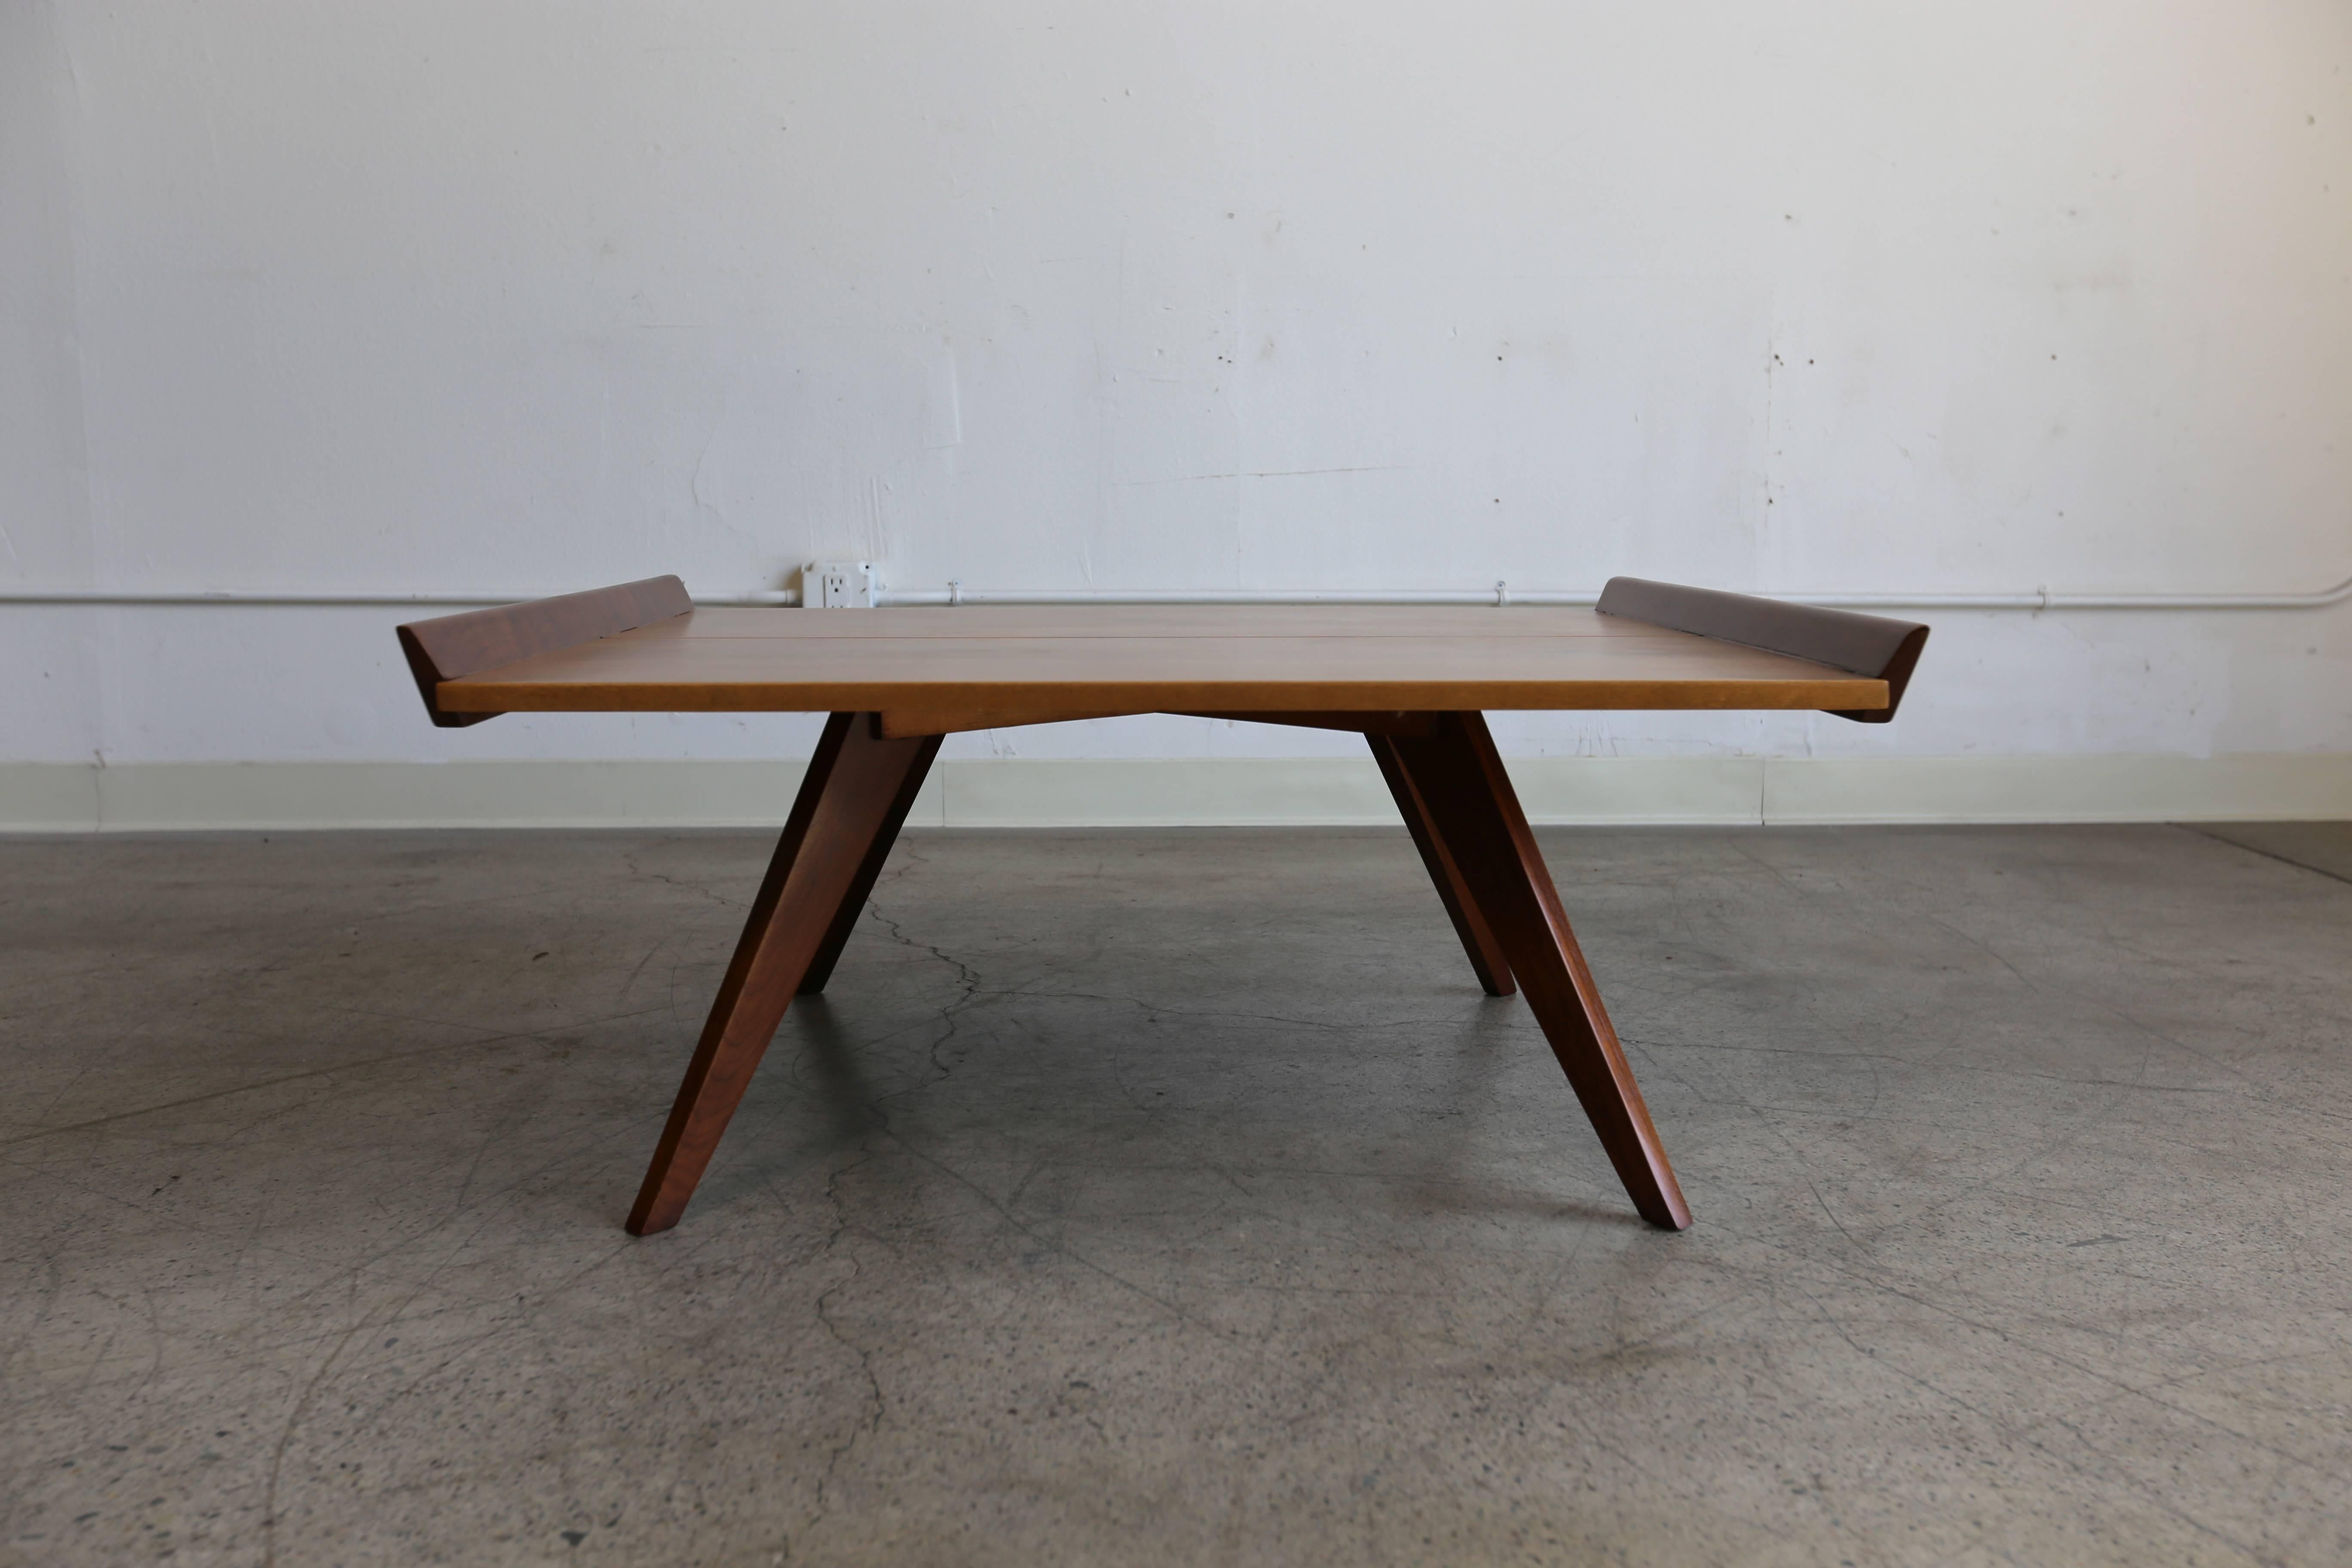 M10 coffee table by George Nakashima for Knoll.